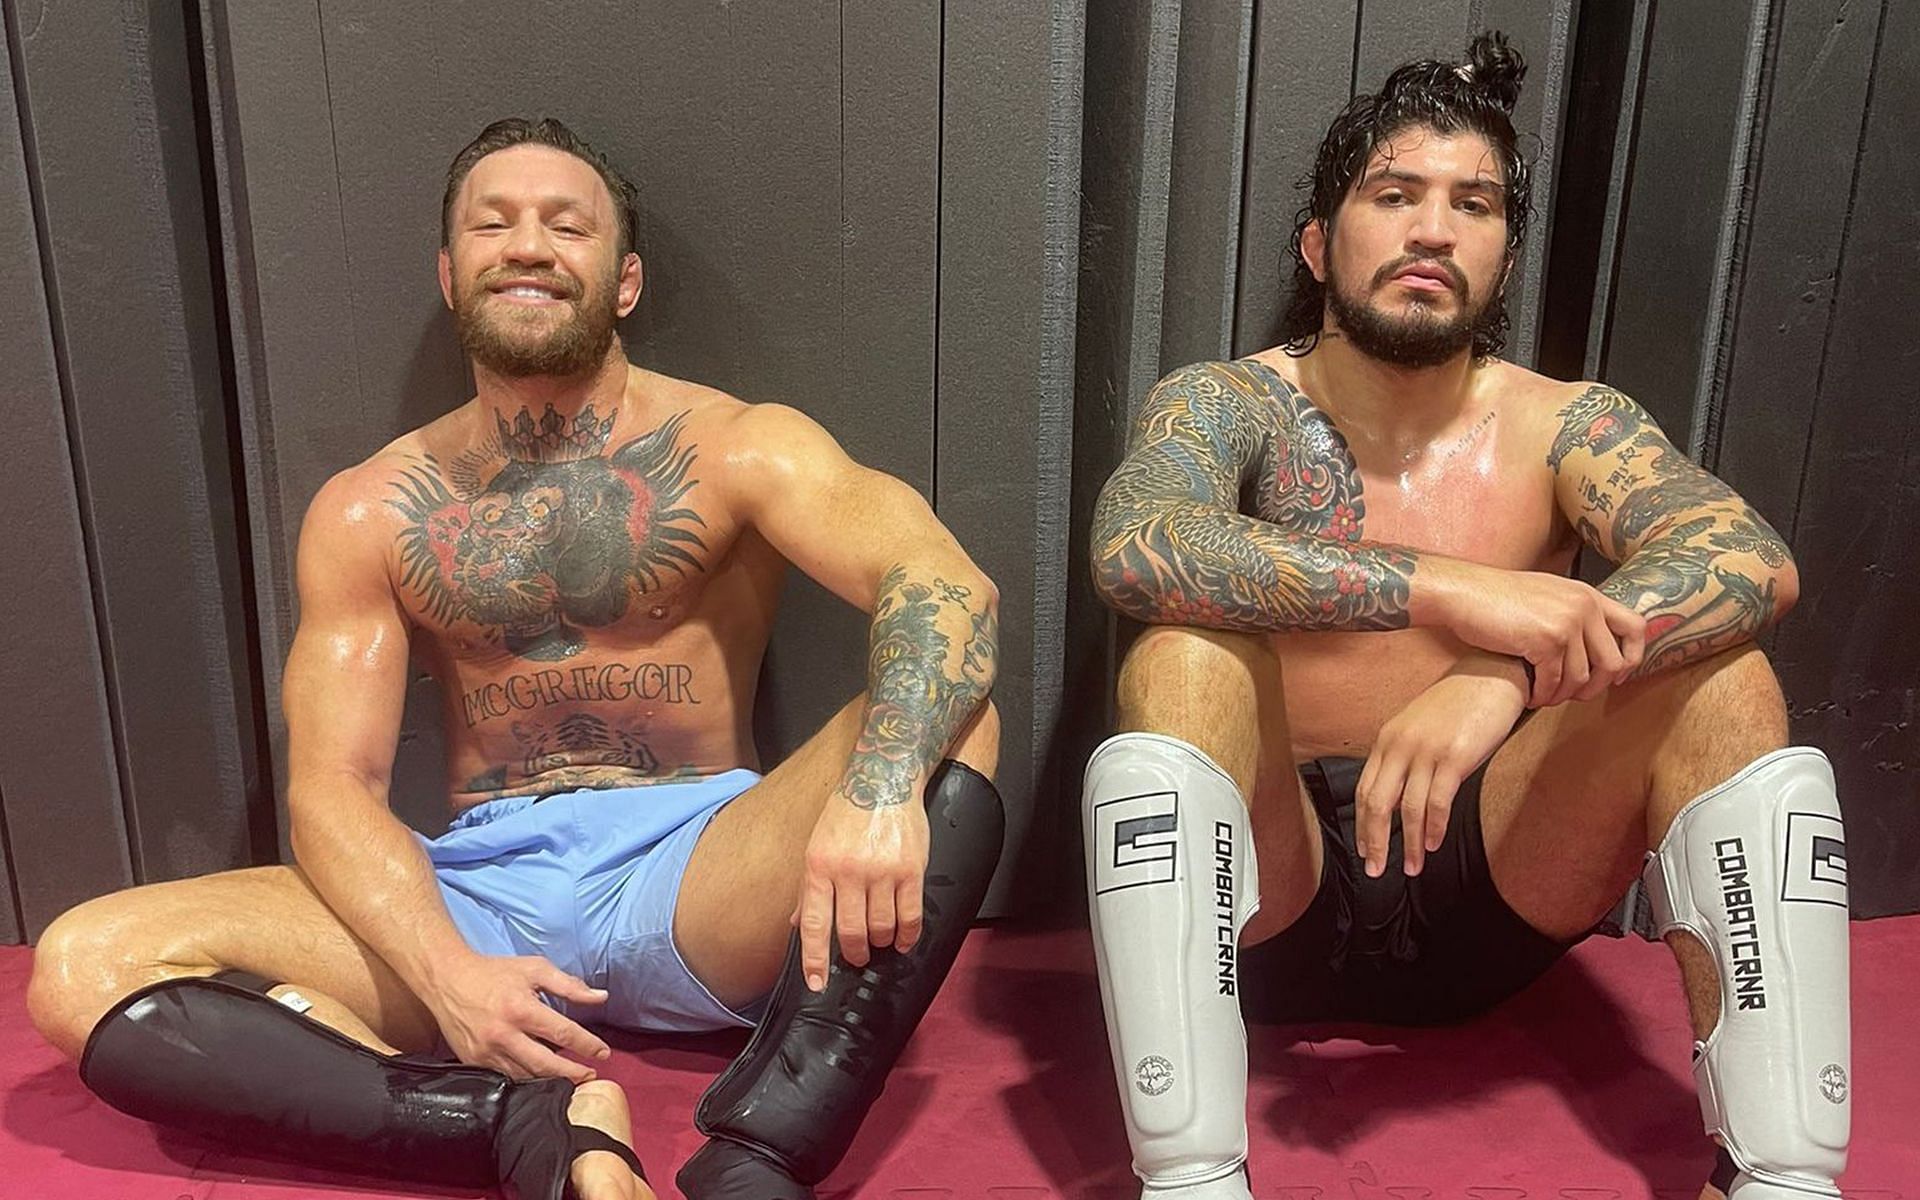 Conor McGregor (L) and Dillon Danis (R) during a training session - Image via @dillondanis Twitter handle